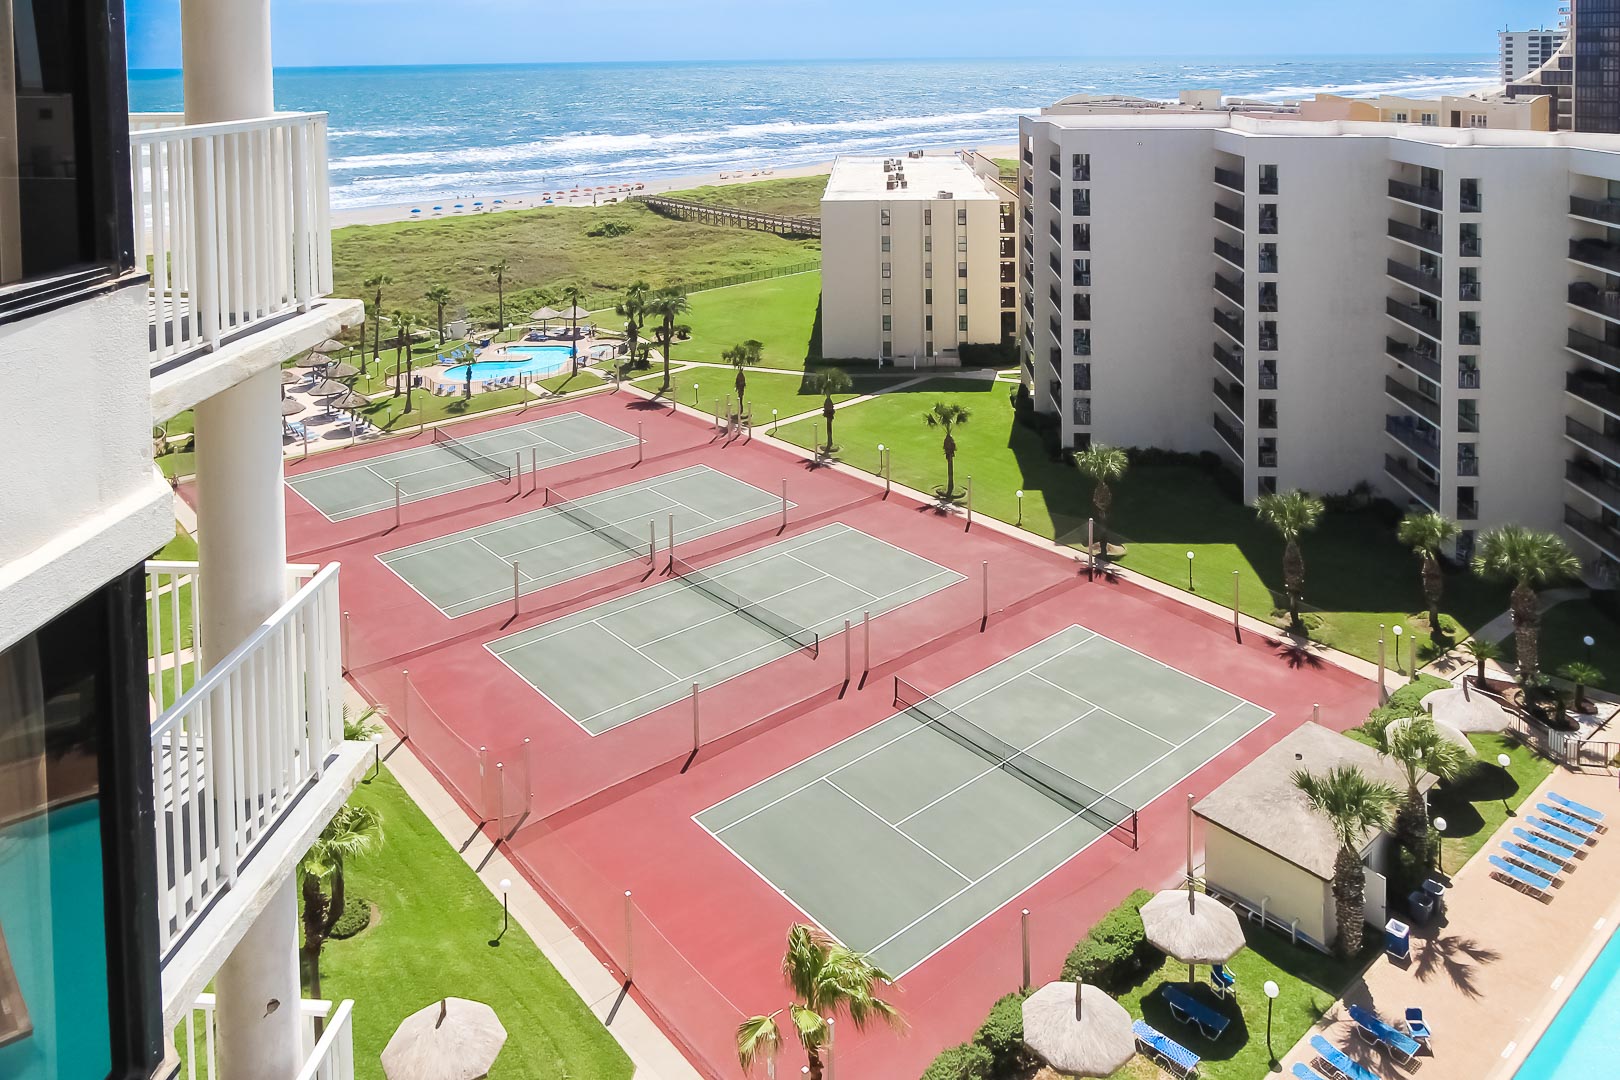 Beachfront Outdoor tennis courts at VRI's Royale Beach and Tennis Club.